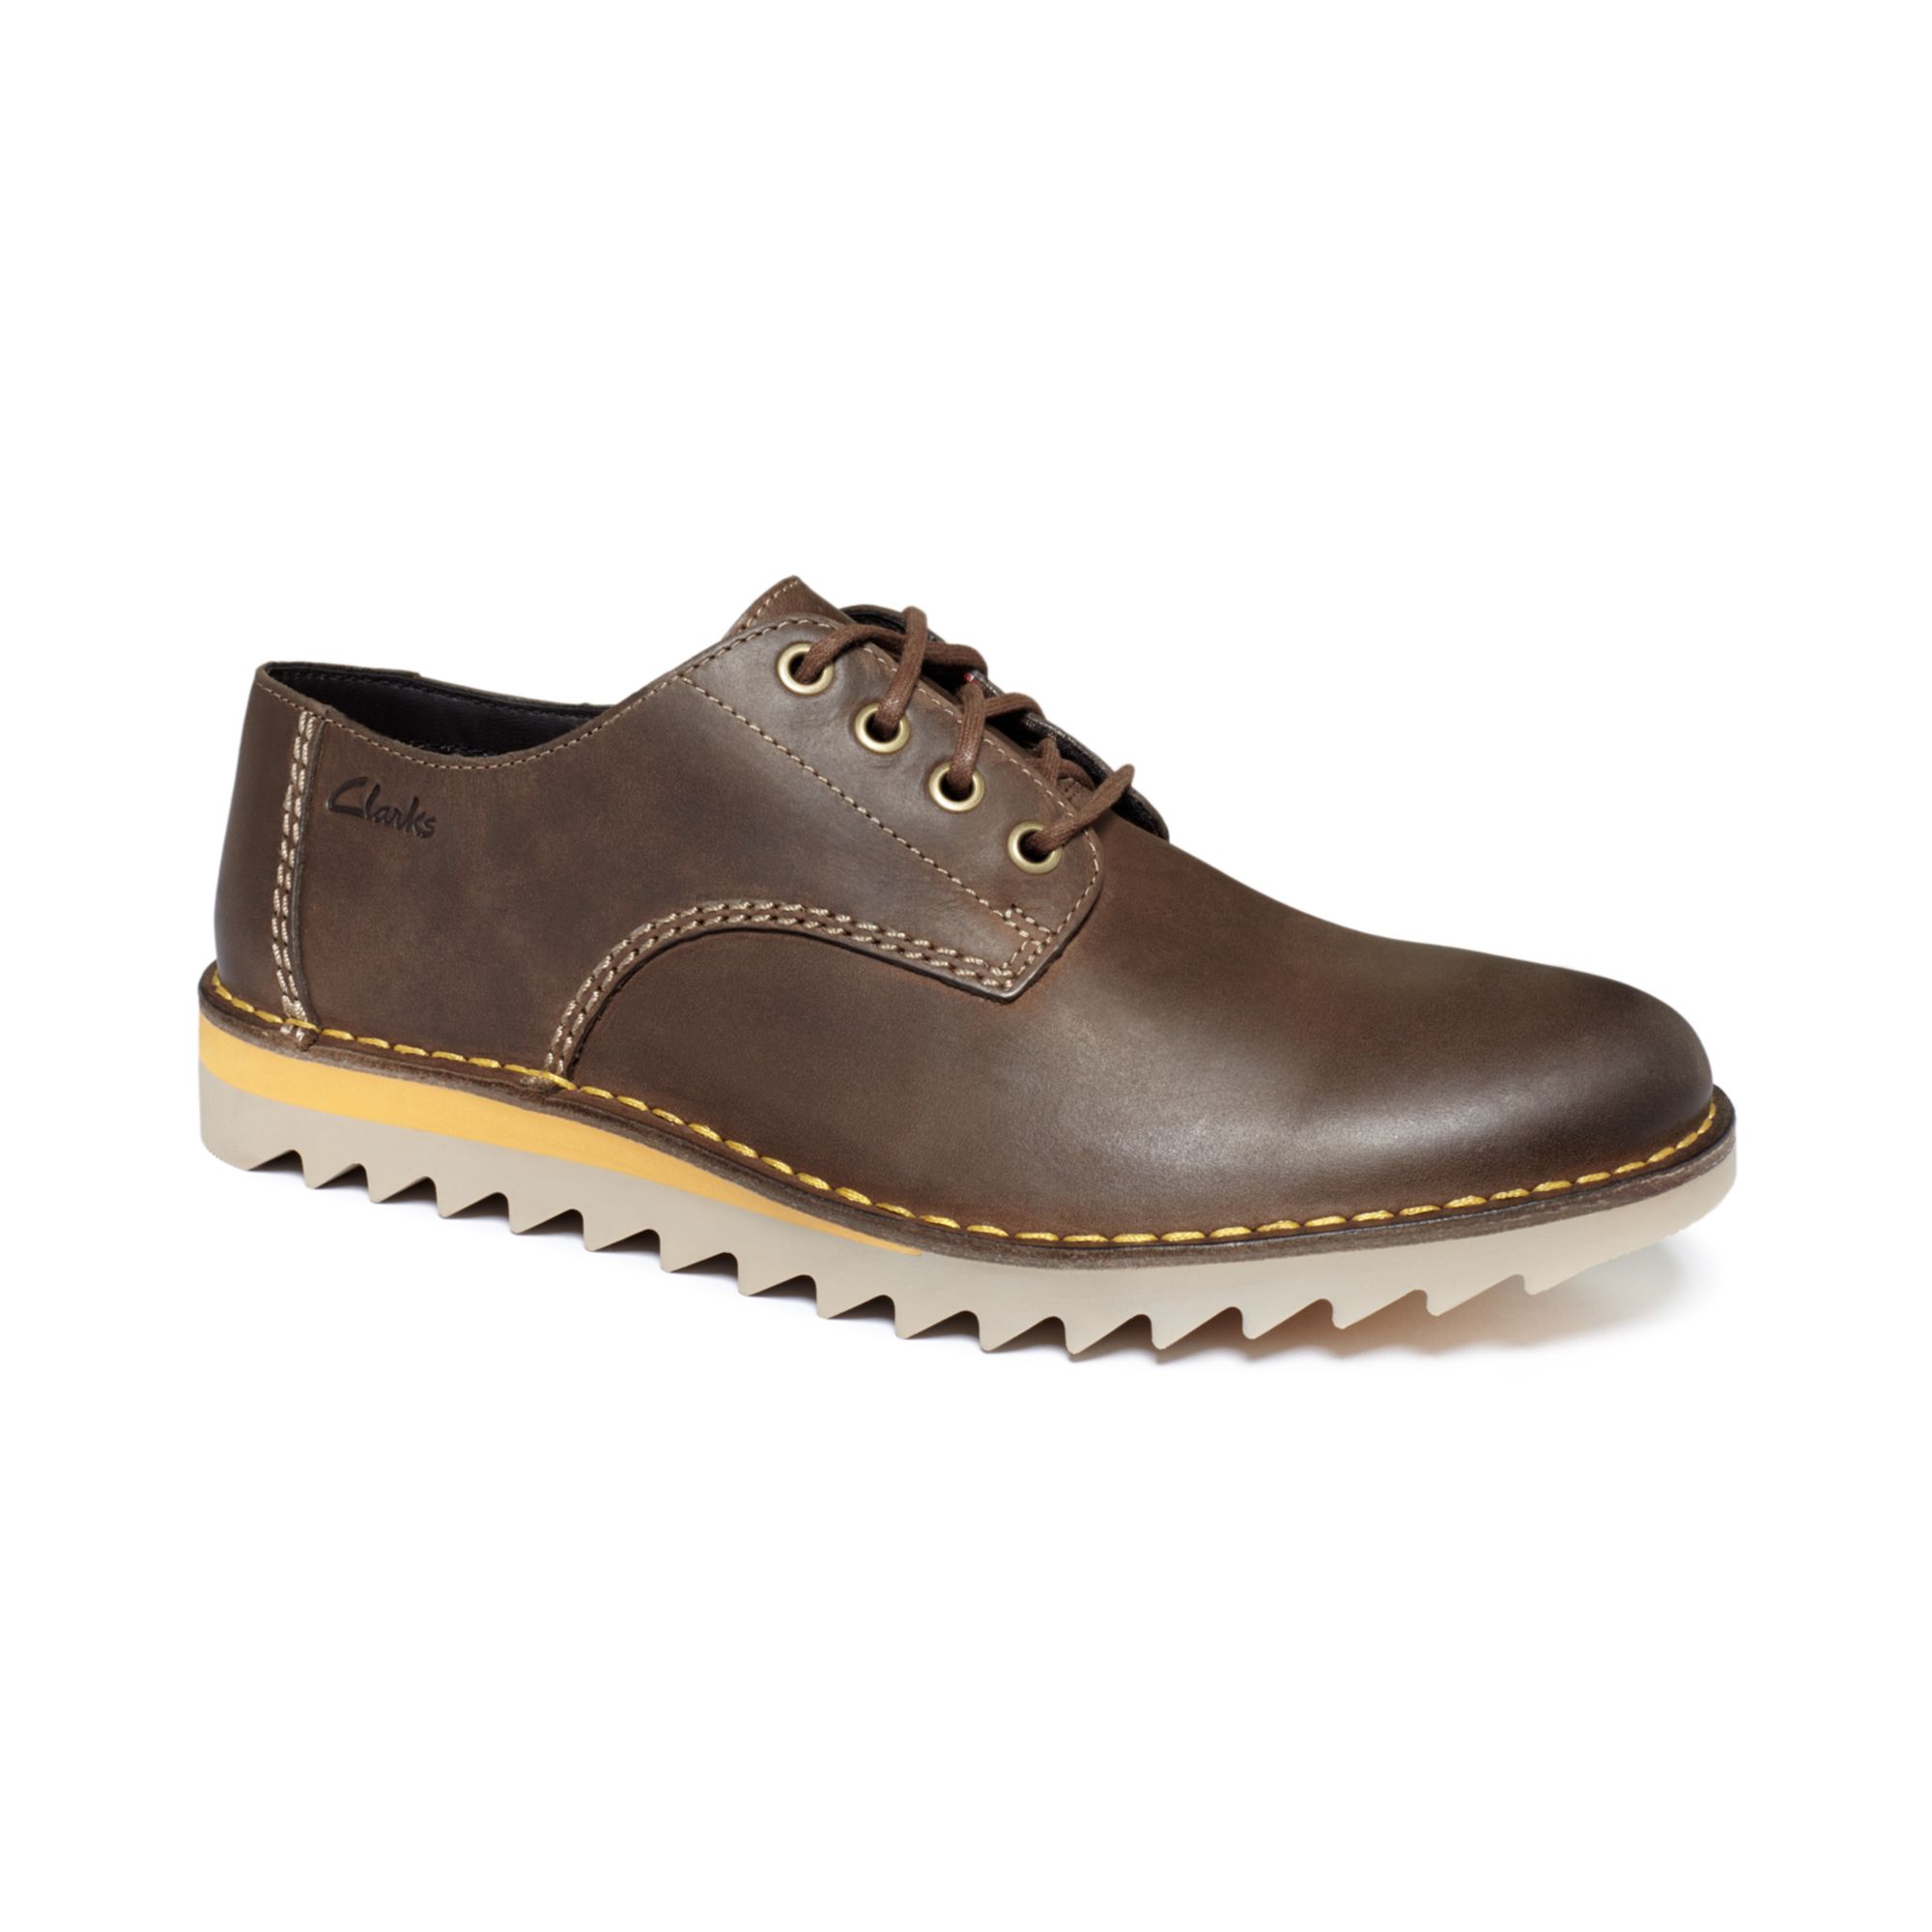 Clarks Newby Fly Lace-up Shoes in Brown 